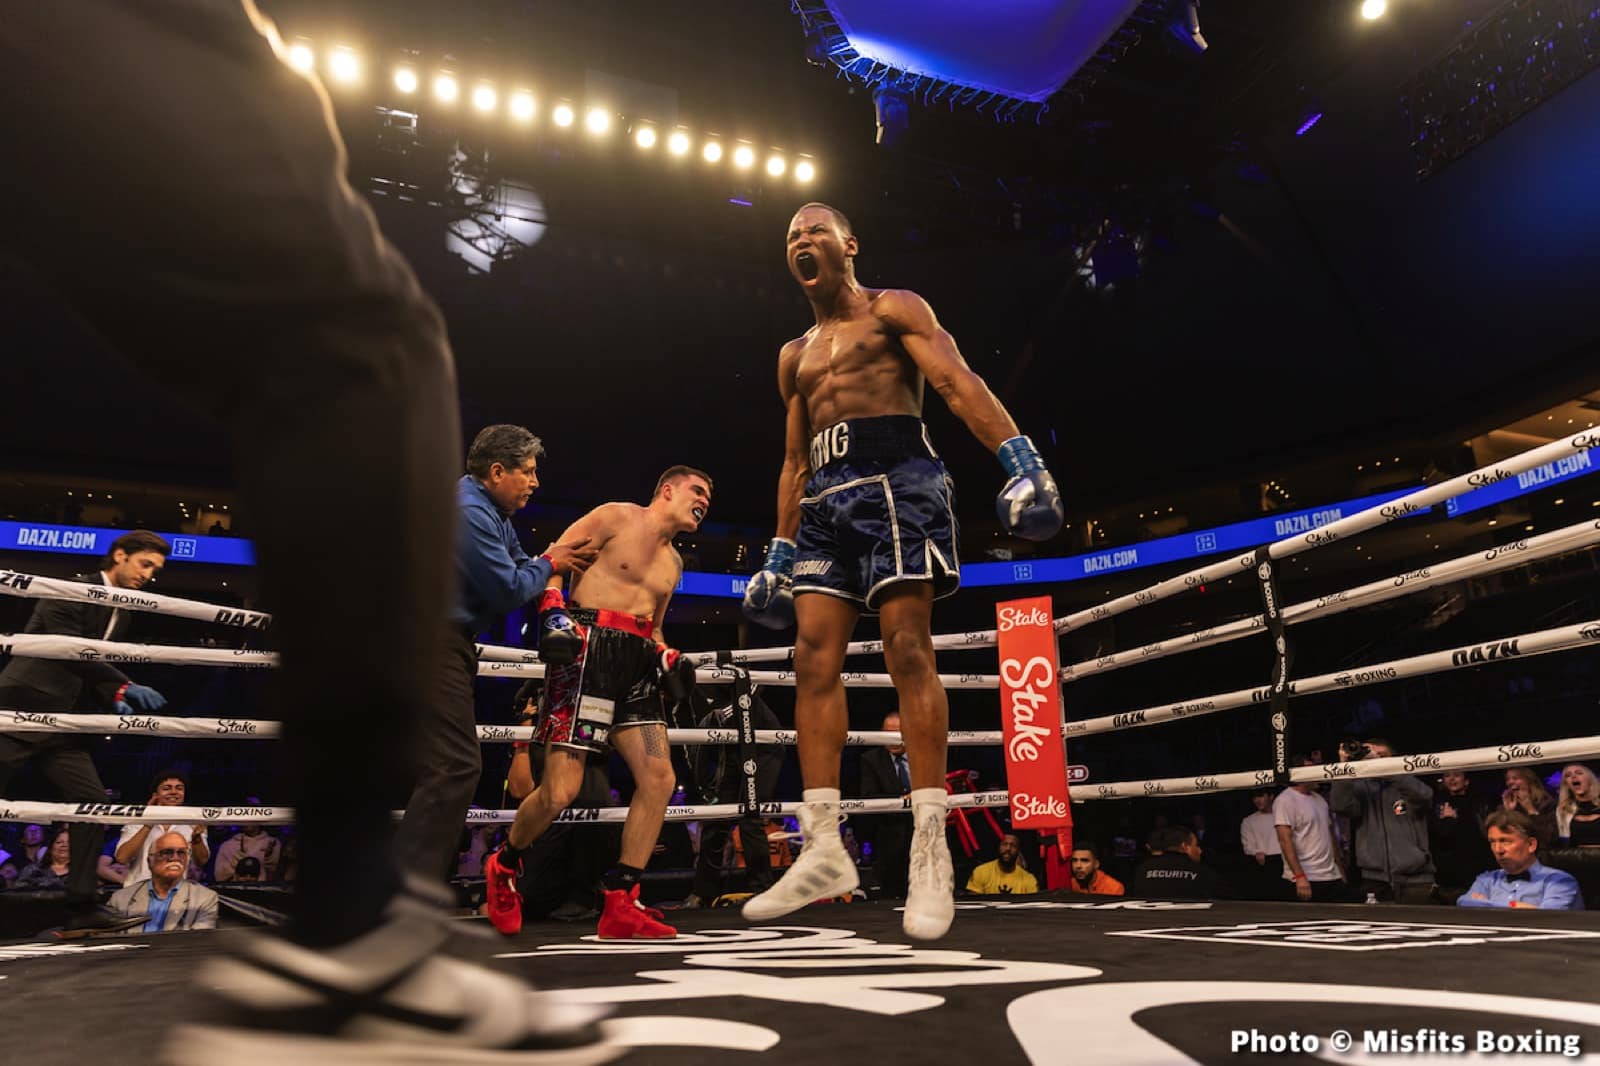 Misfits Boxing 3 / DAZN Live Results & Photos